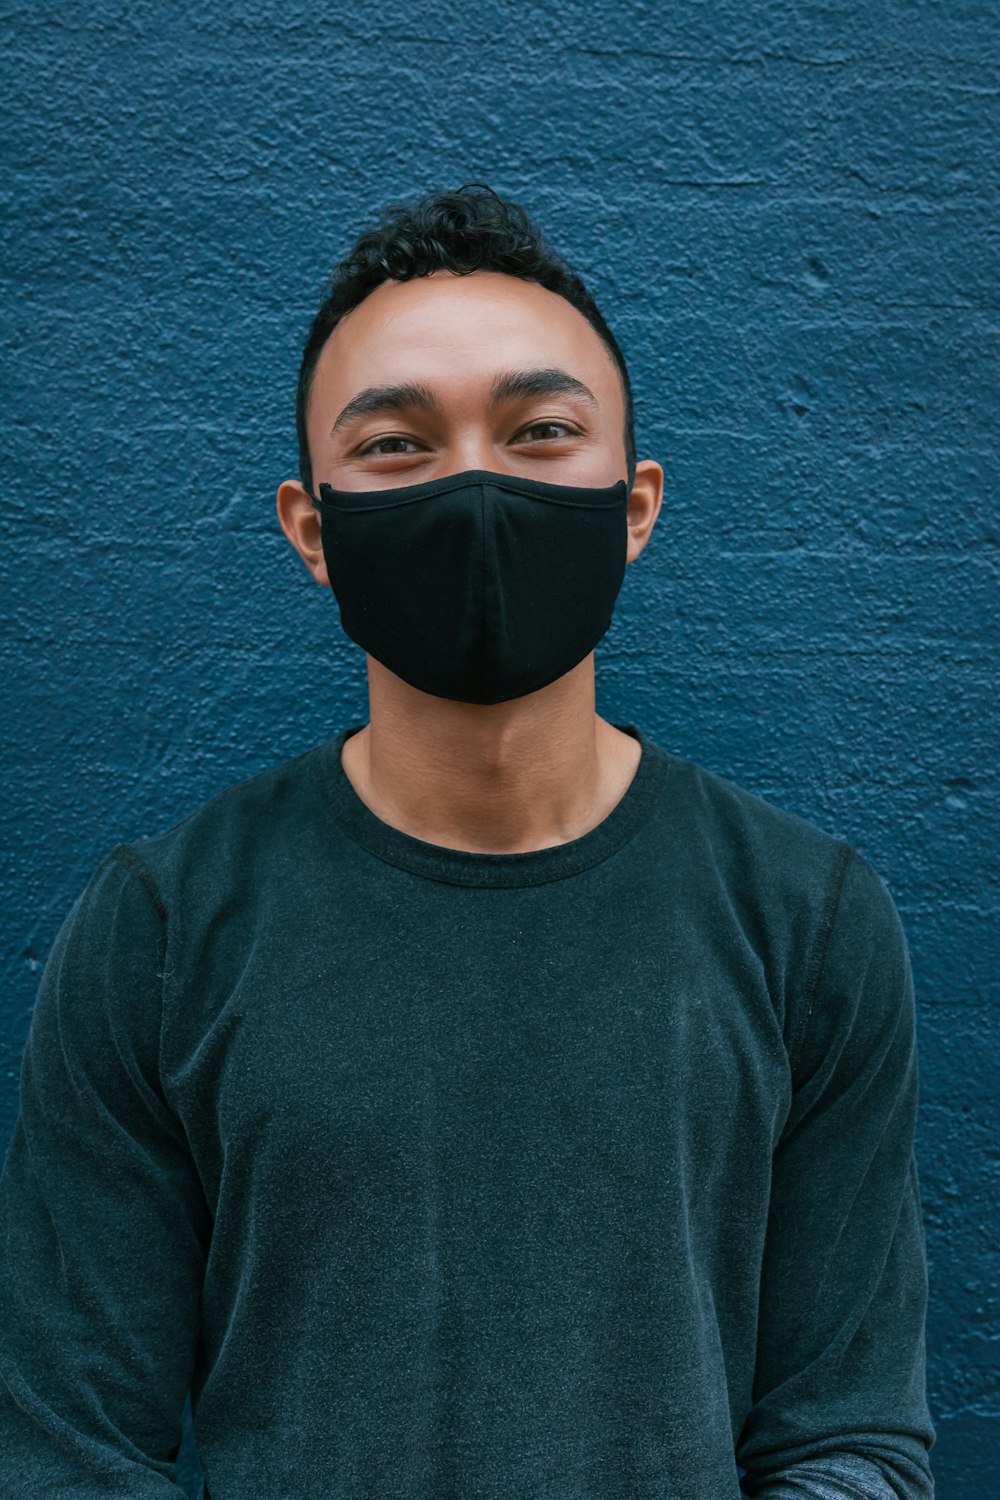 Download 500 Face Mask Pictures Hd Download Free Images On Unsplash